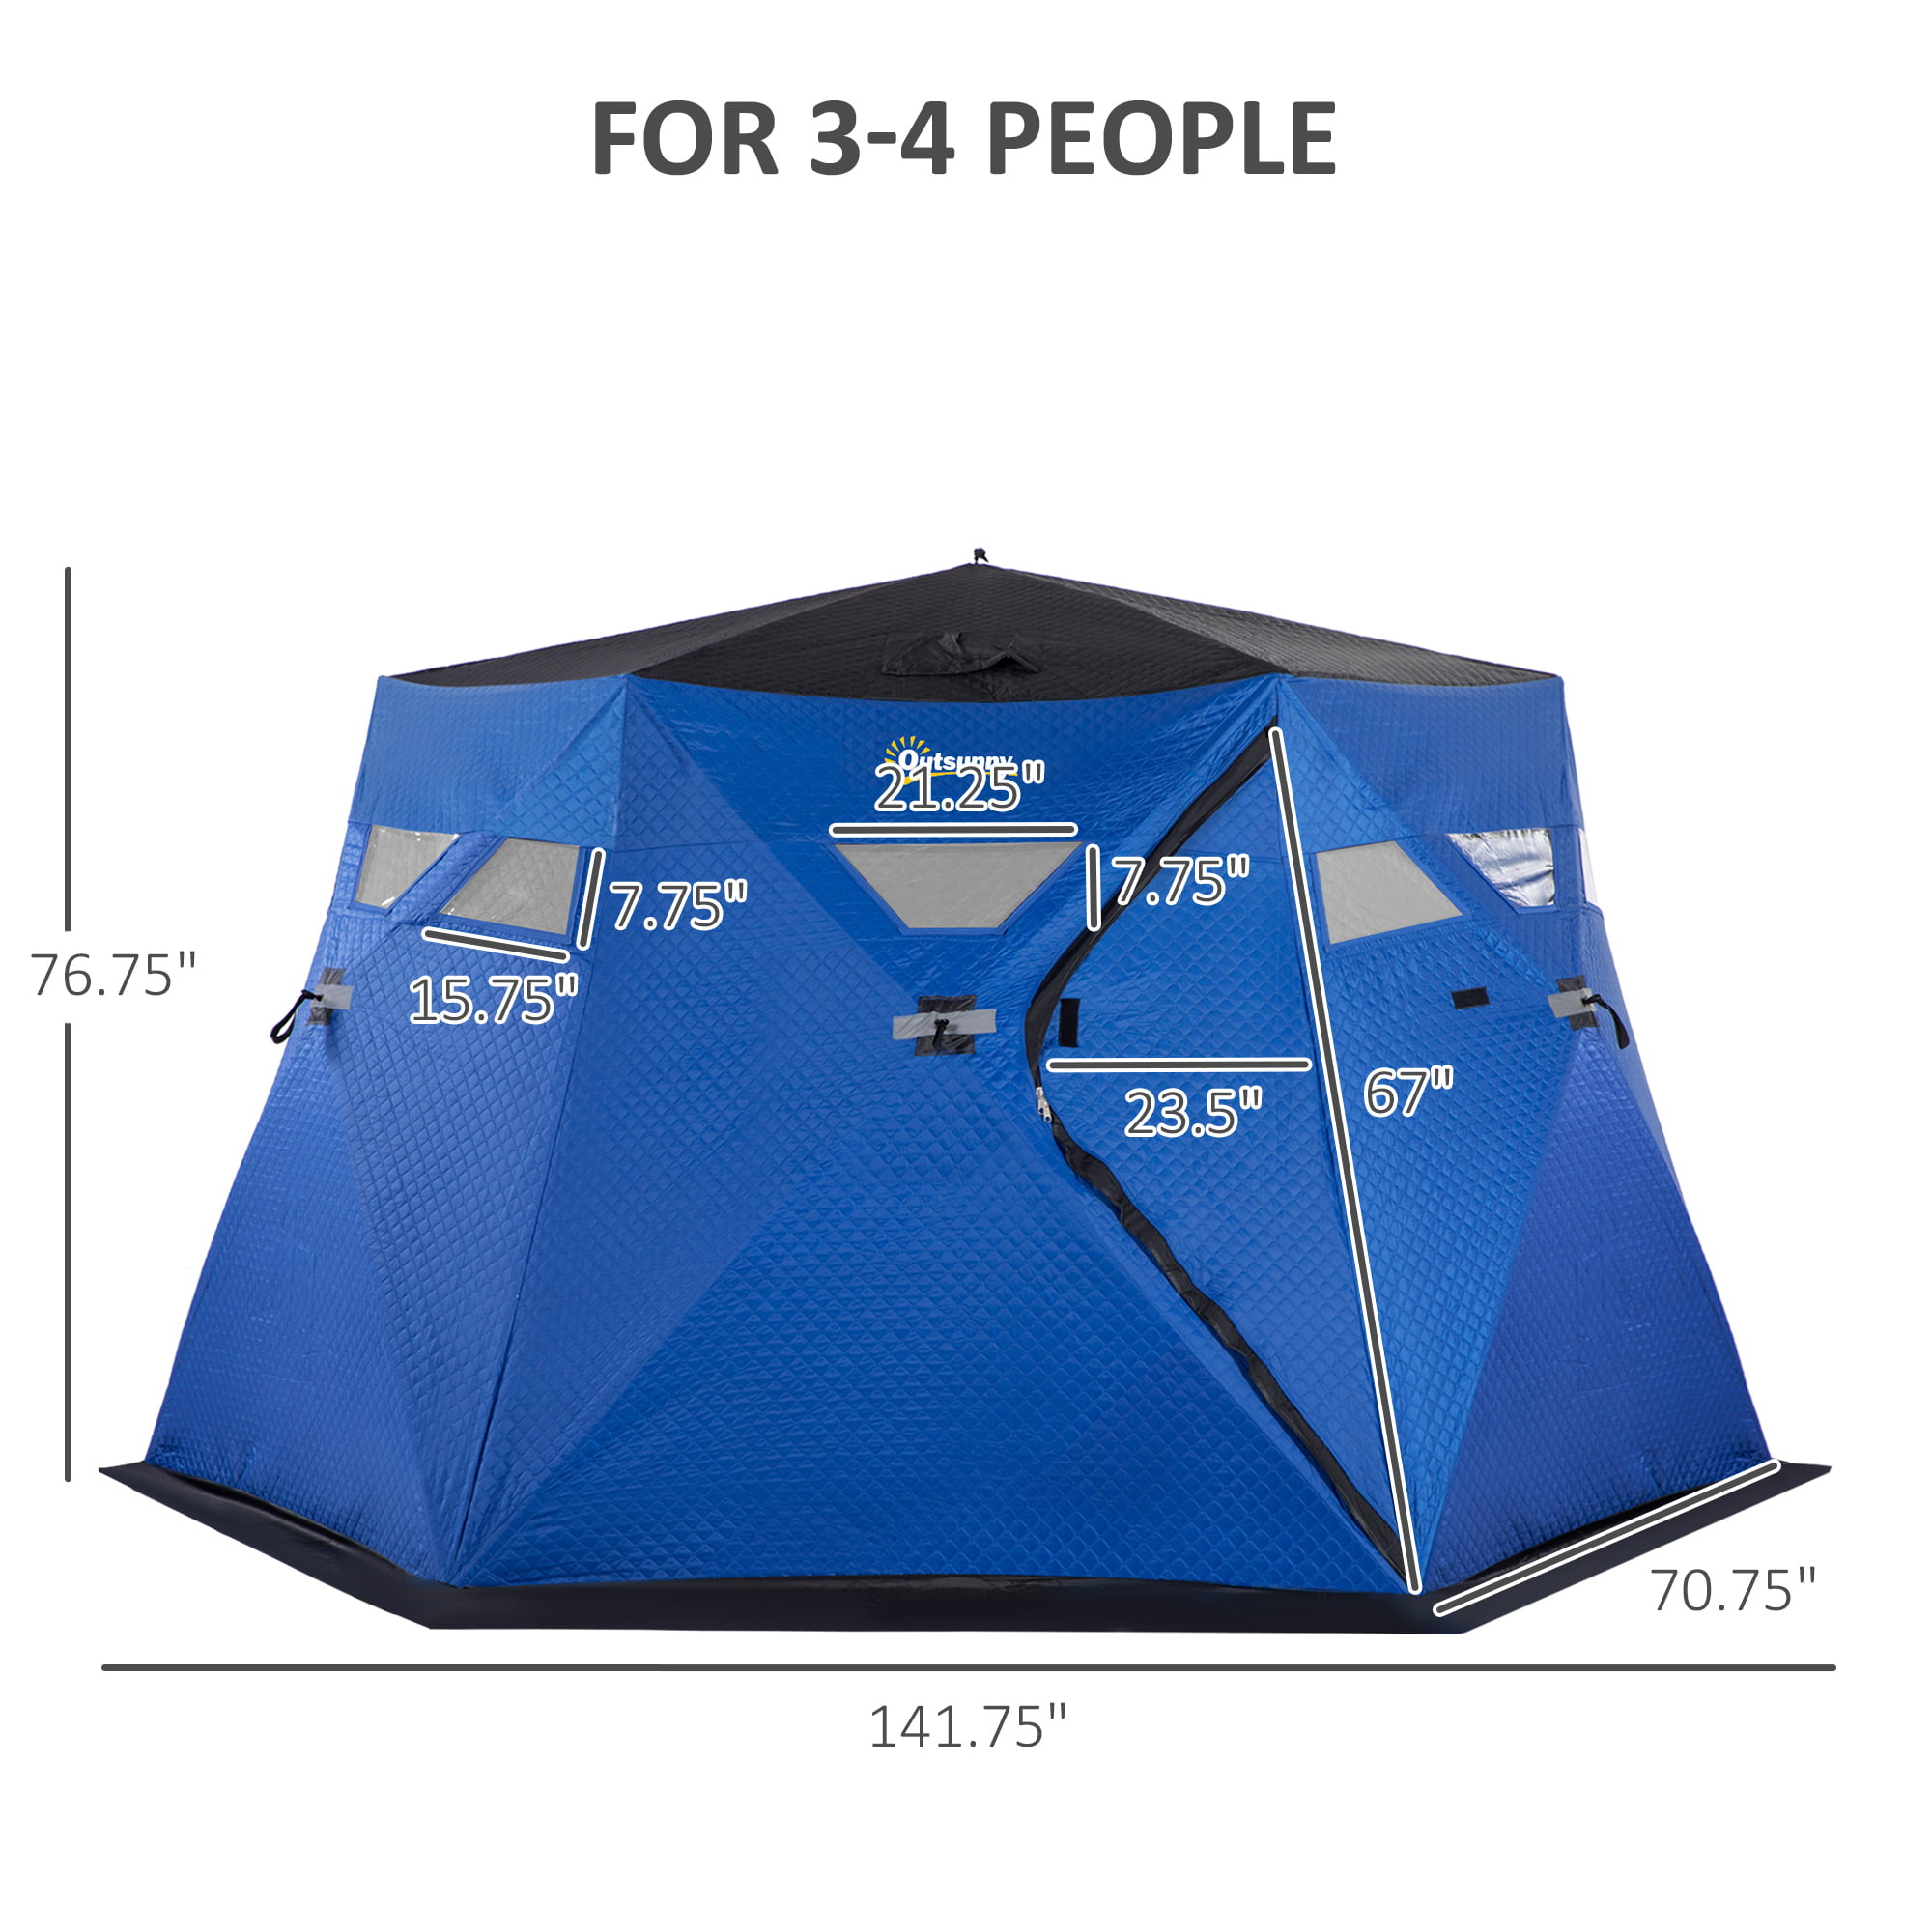 Outsunny 4 Man Insulated Pop Up Ice Fishing Tent, Blue 